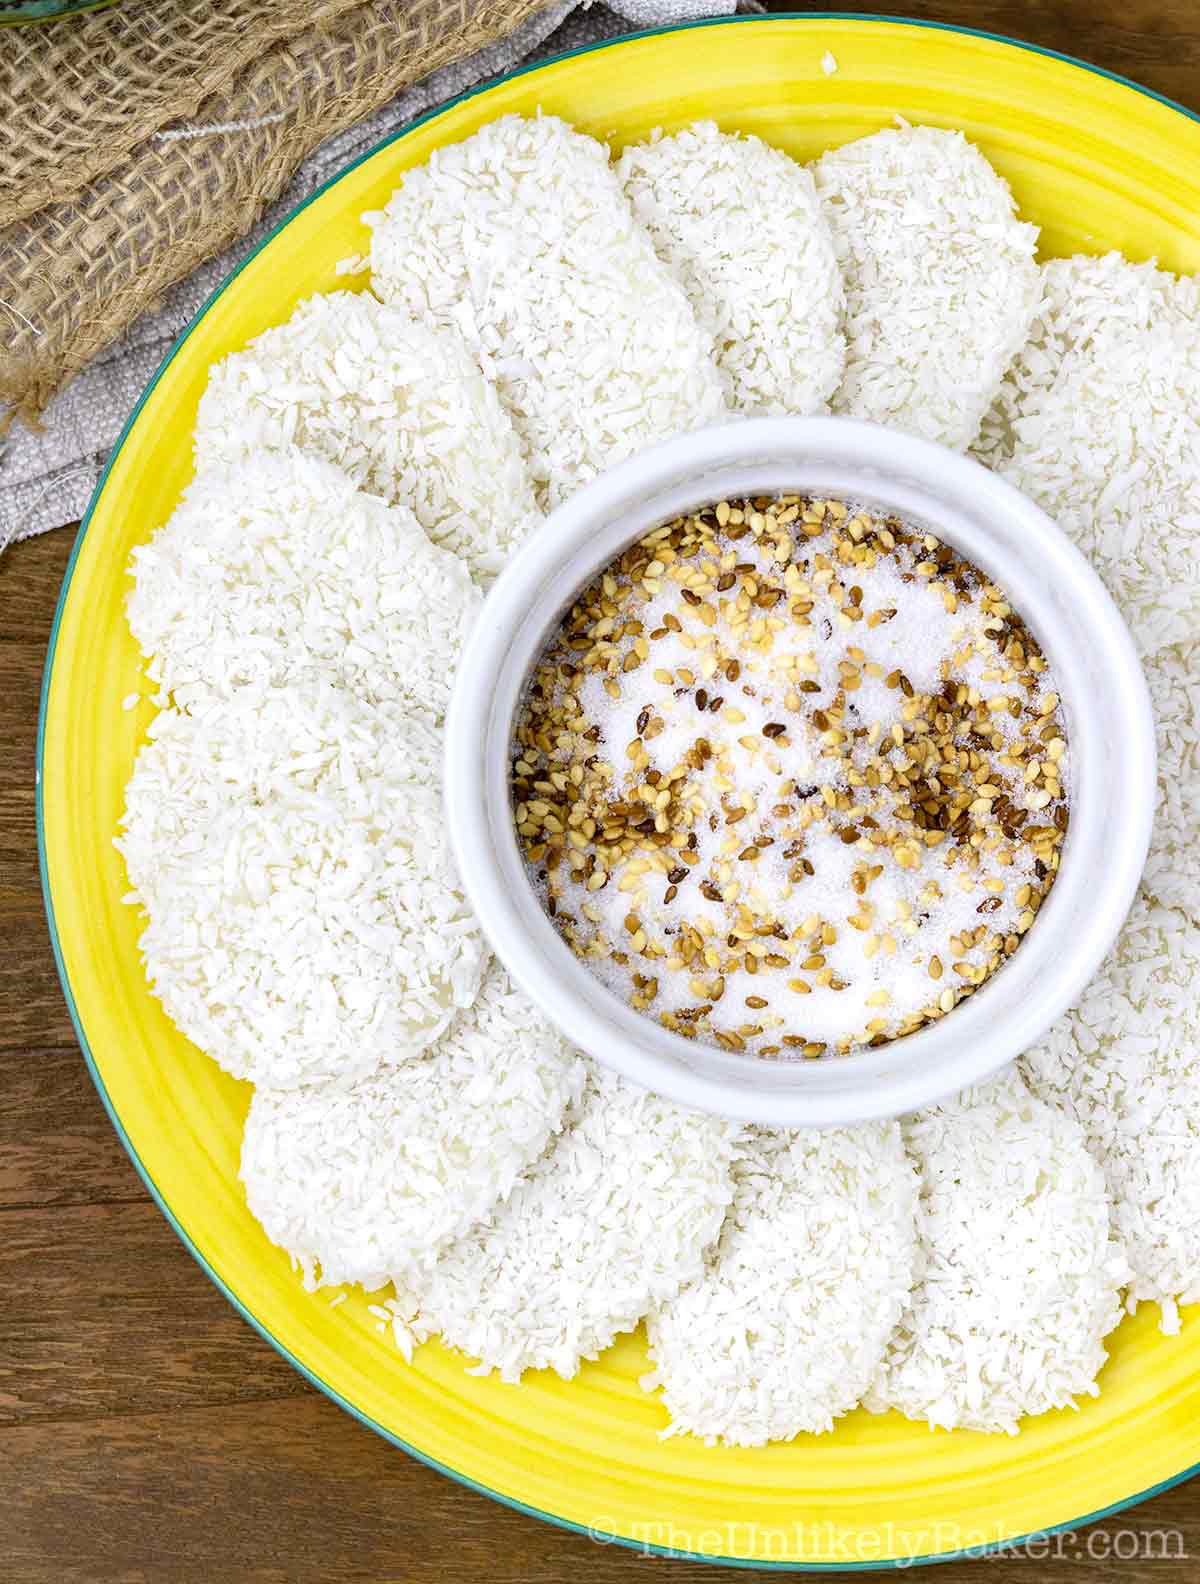 Palitaw fanned out on a yellow plate with toasted sesame and sugar topping in the middle.